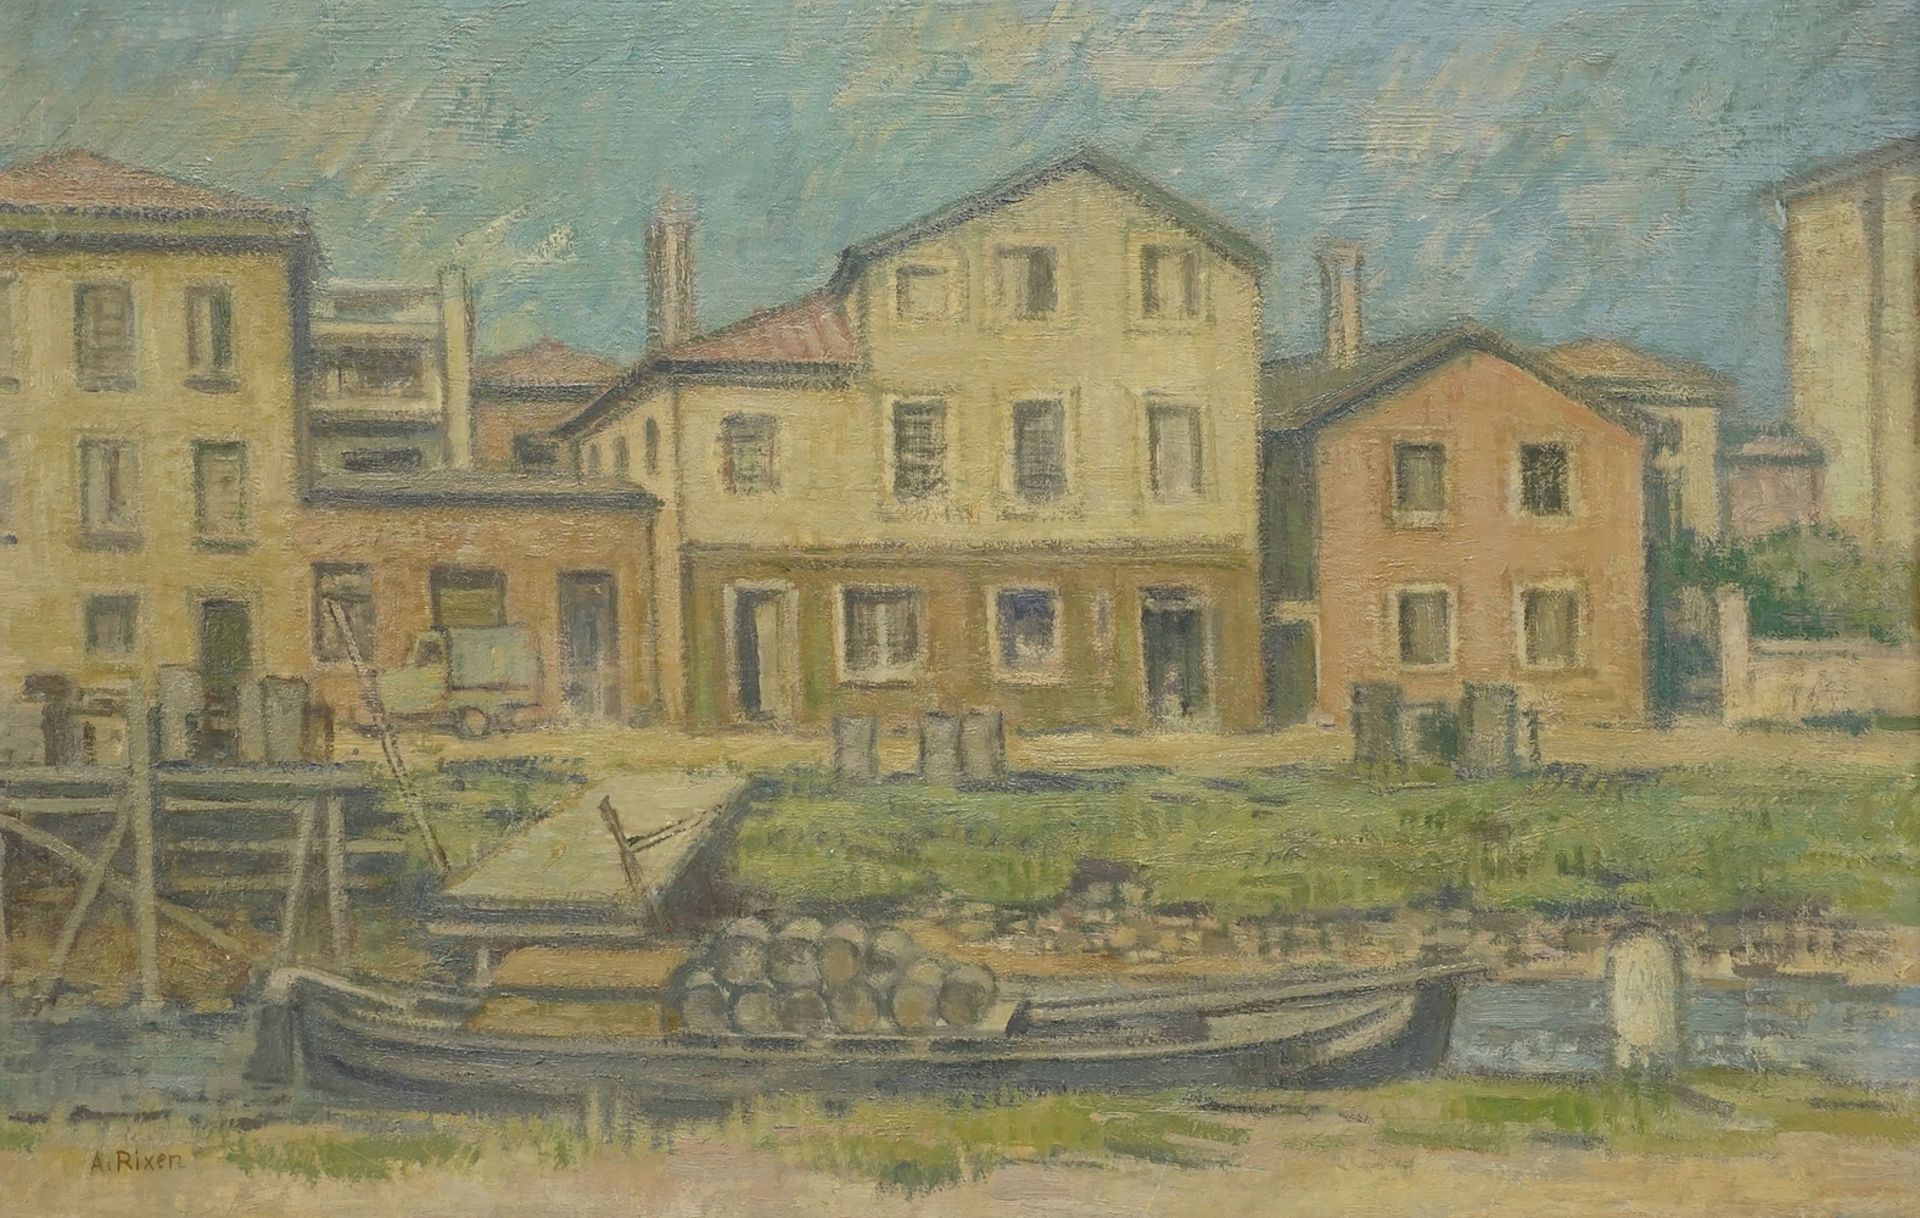 August Rixen (1897-1984), Row of houses by the water